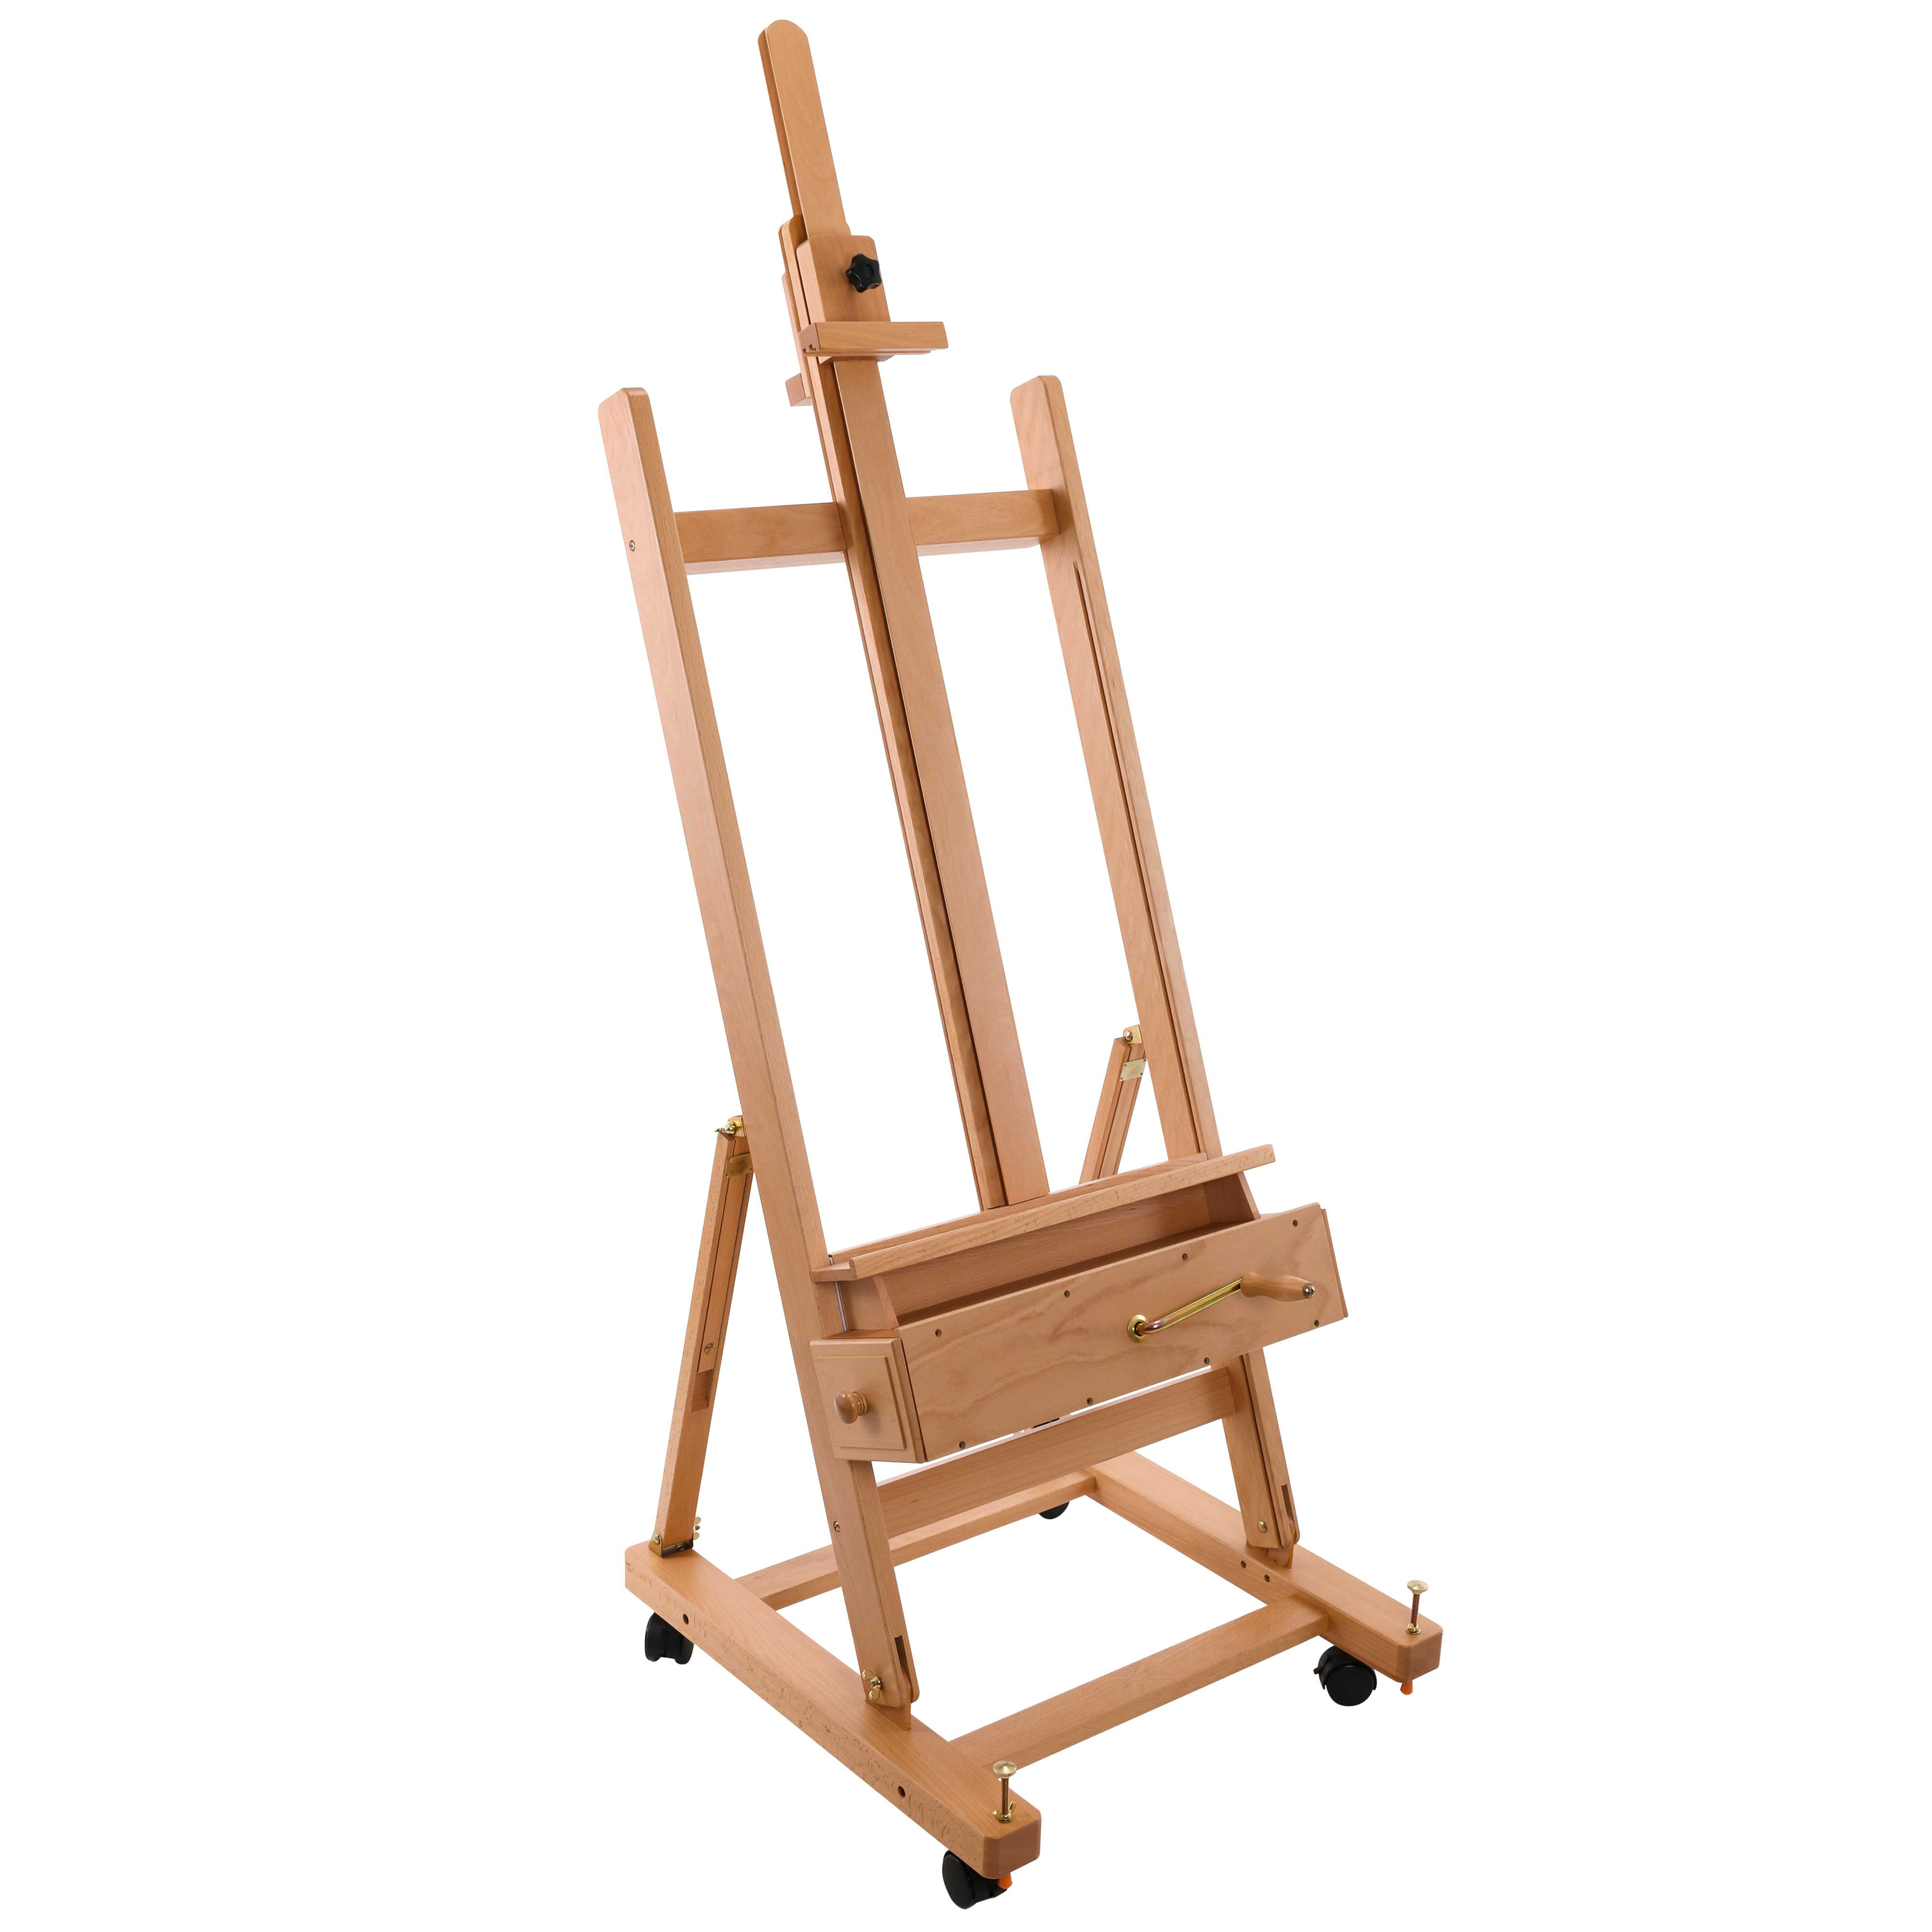 Sketching Display and Exhibition GYMAX Professional Collapsible Beech Wood Floor Standing Easel H-Frame Artist Studio Easel for Painting